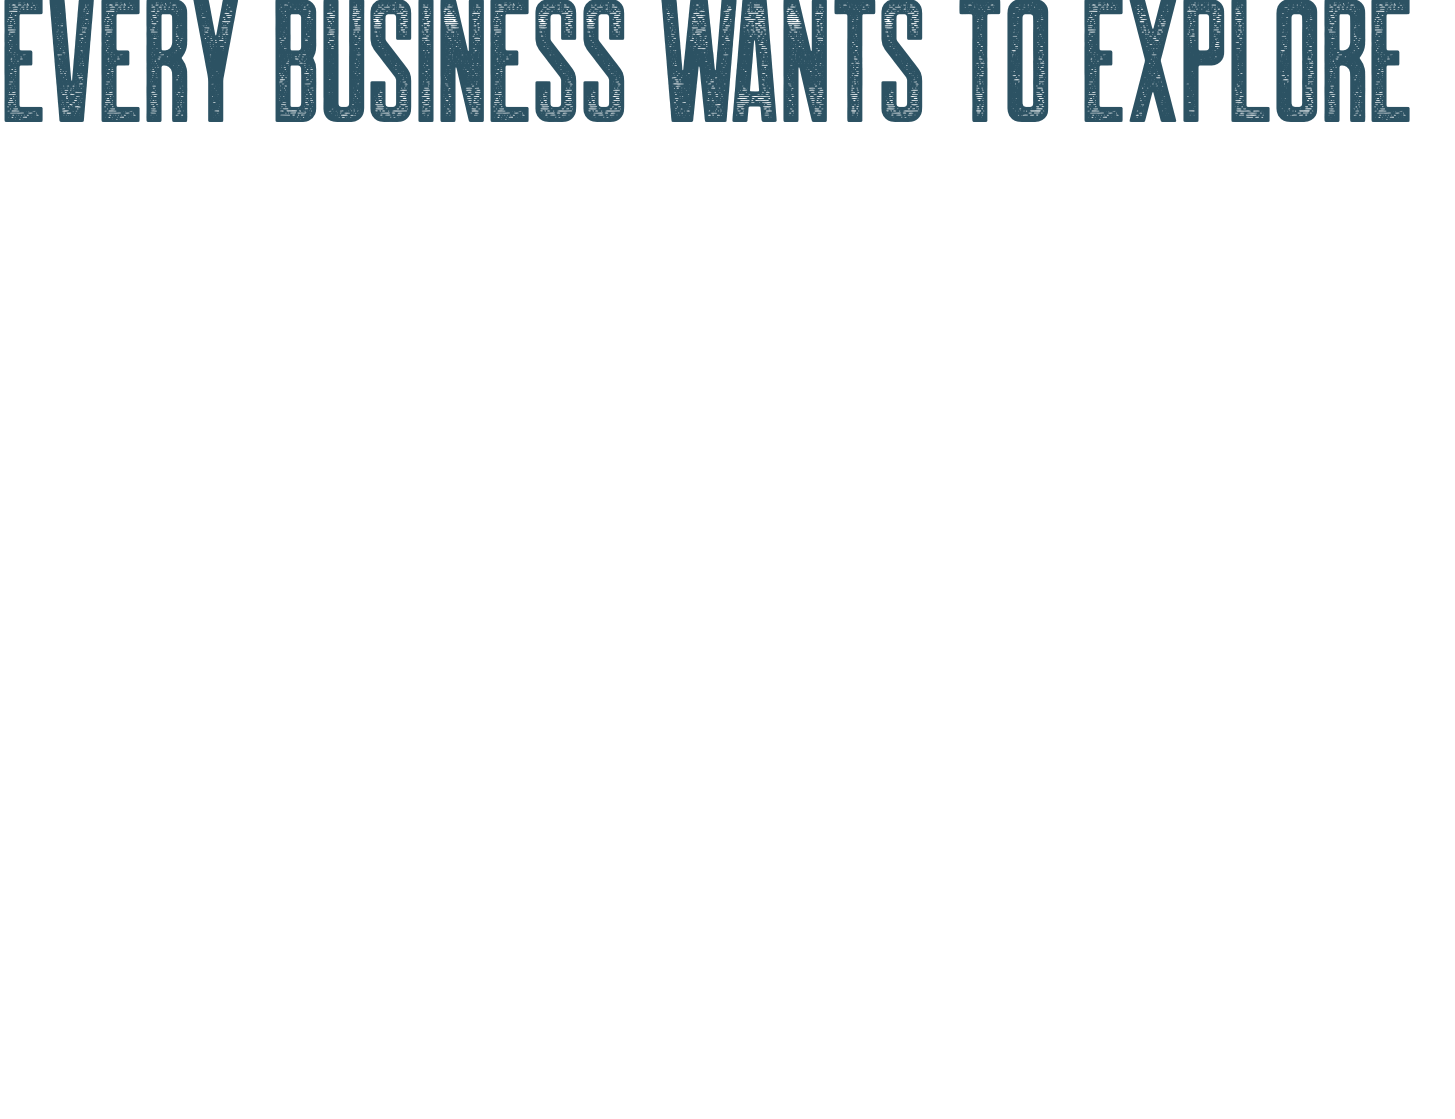 Every business wants to explore new horizons